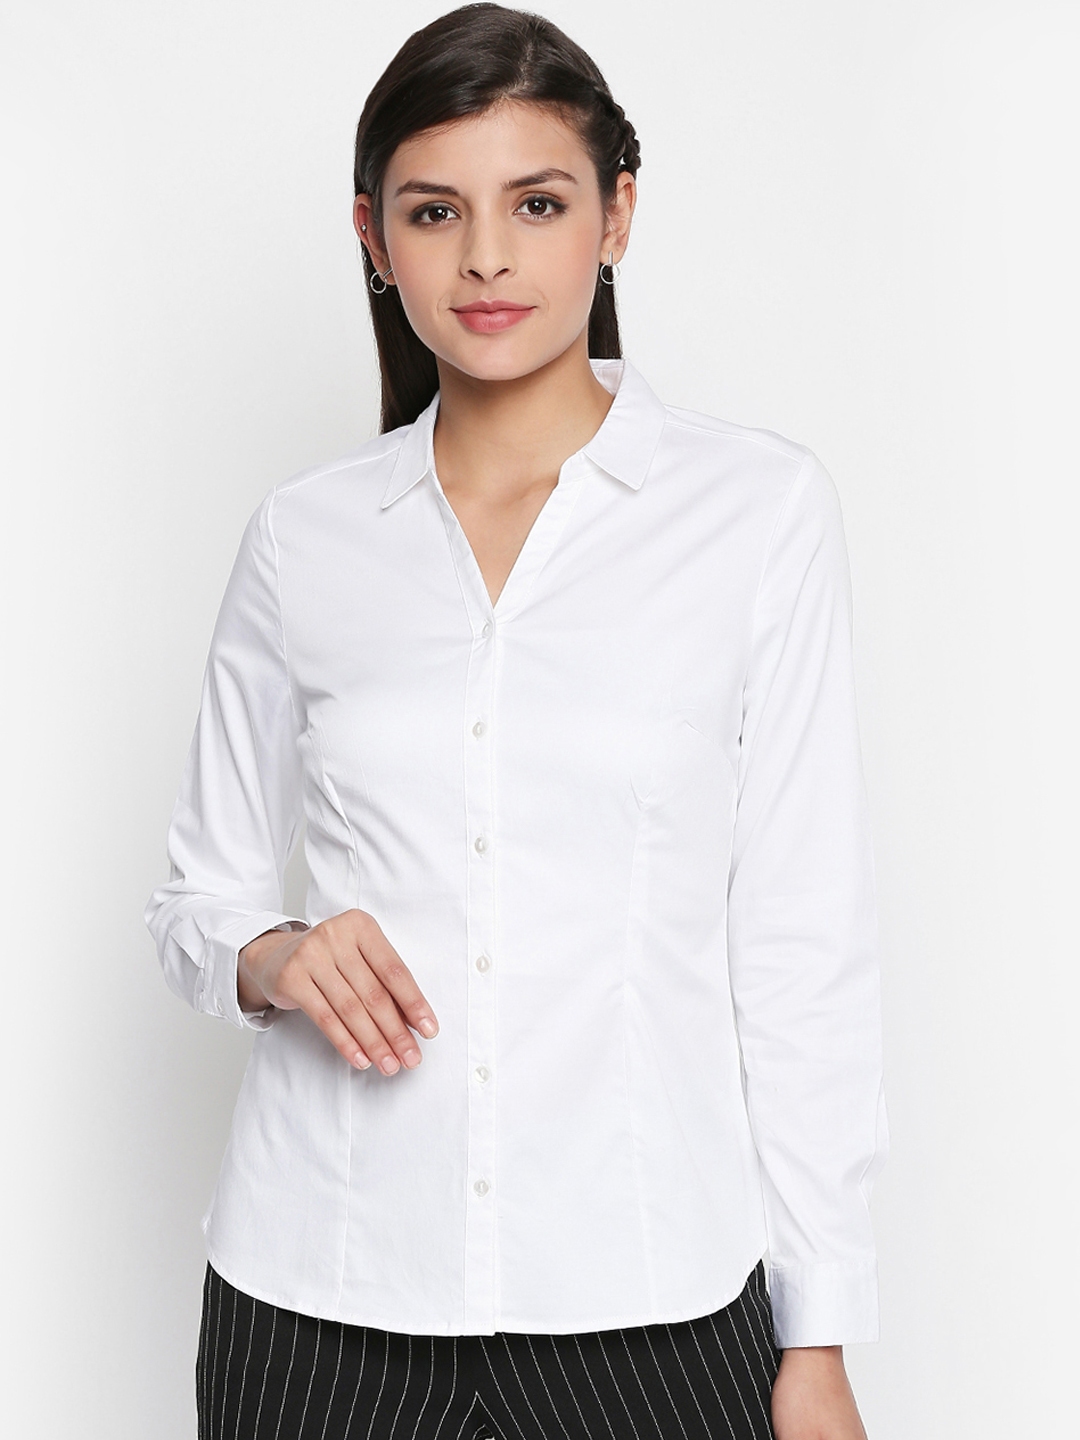 annabelle by pantaloons women's formal shirt